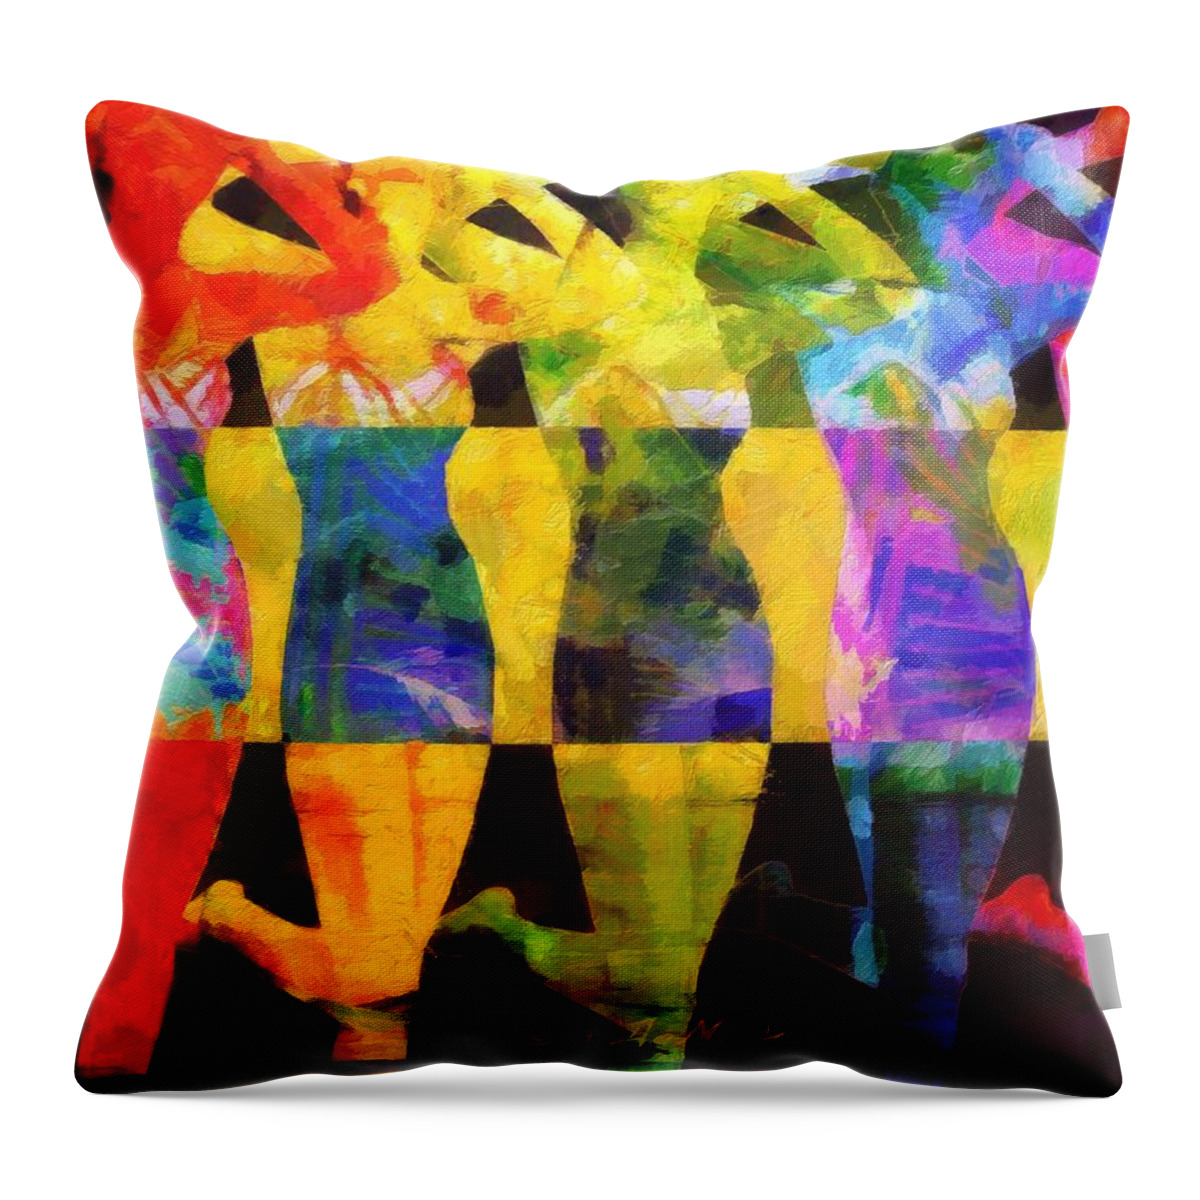 Women Throw Pillow featuring the painting Sistas by Lelia DeMello